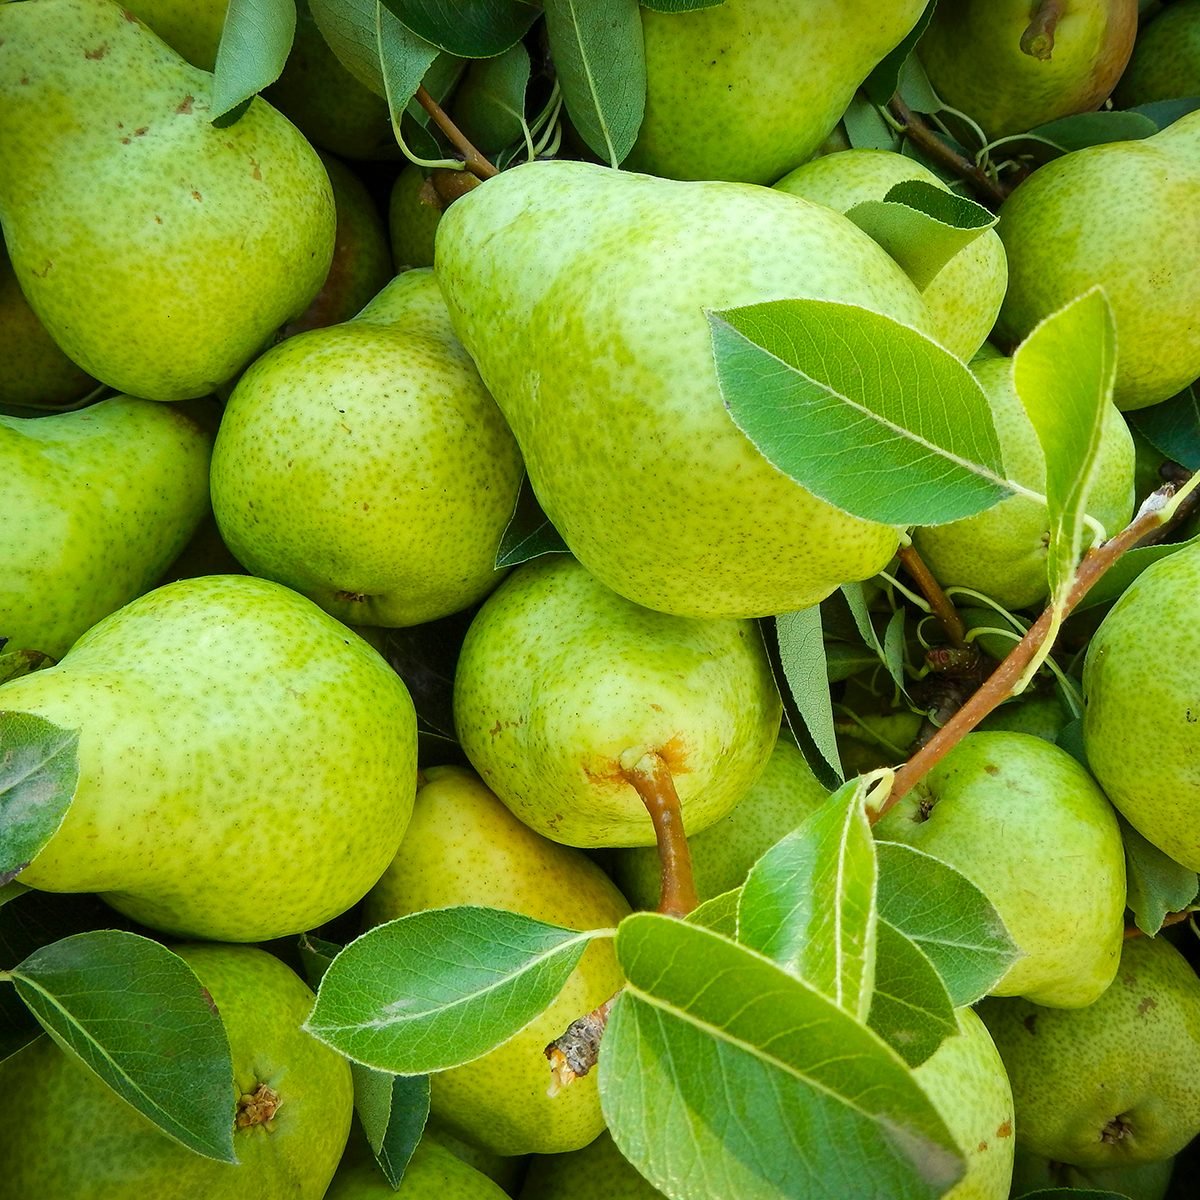 14 Different Types of Pears With Pictures - Only Foods